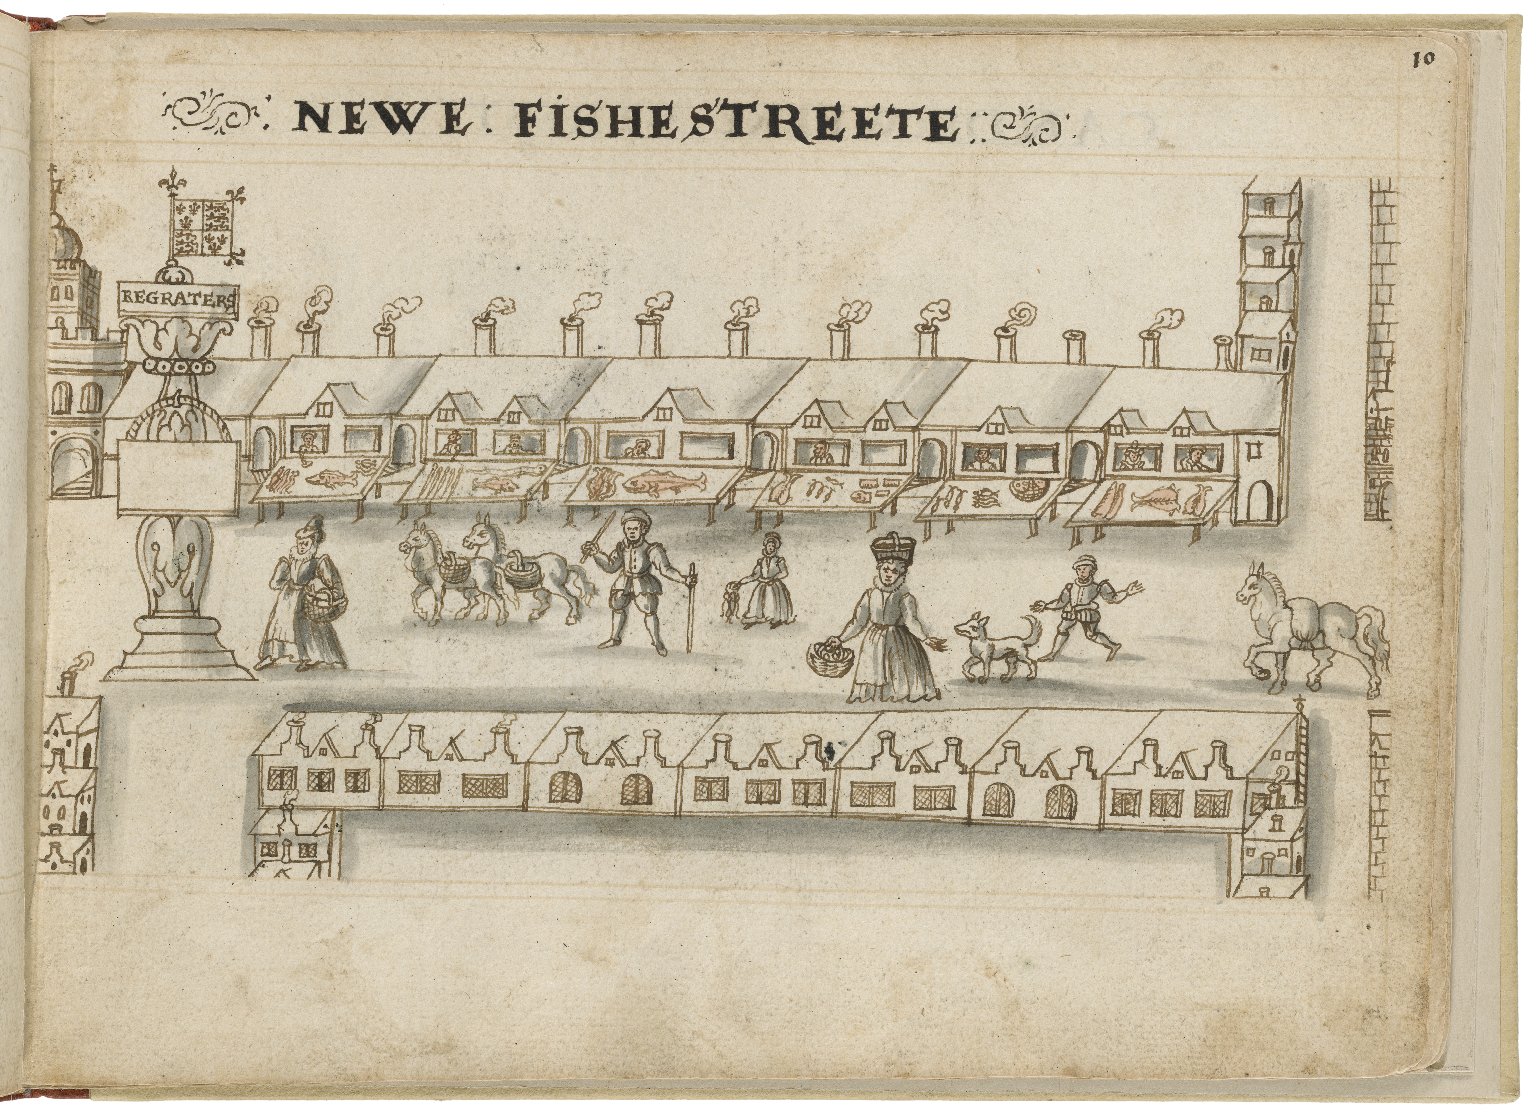 Drawing of New Fish Street by Hugh Alley. Image courtesy of the Folger Digital Image Collection.